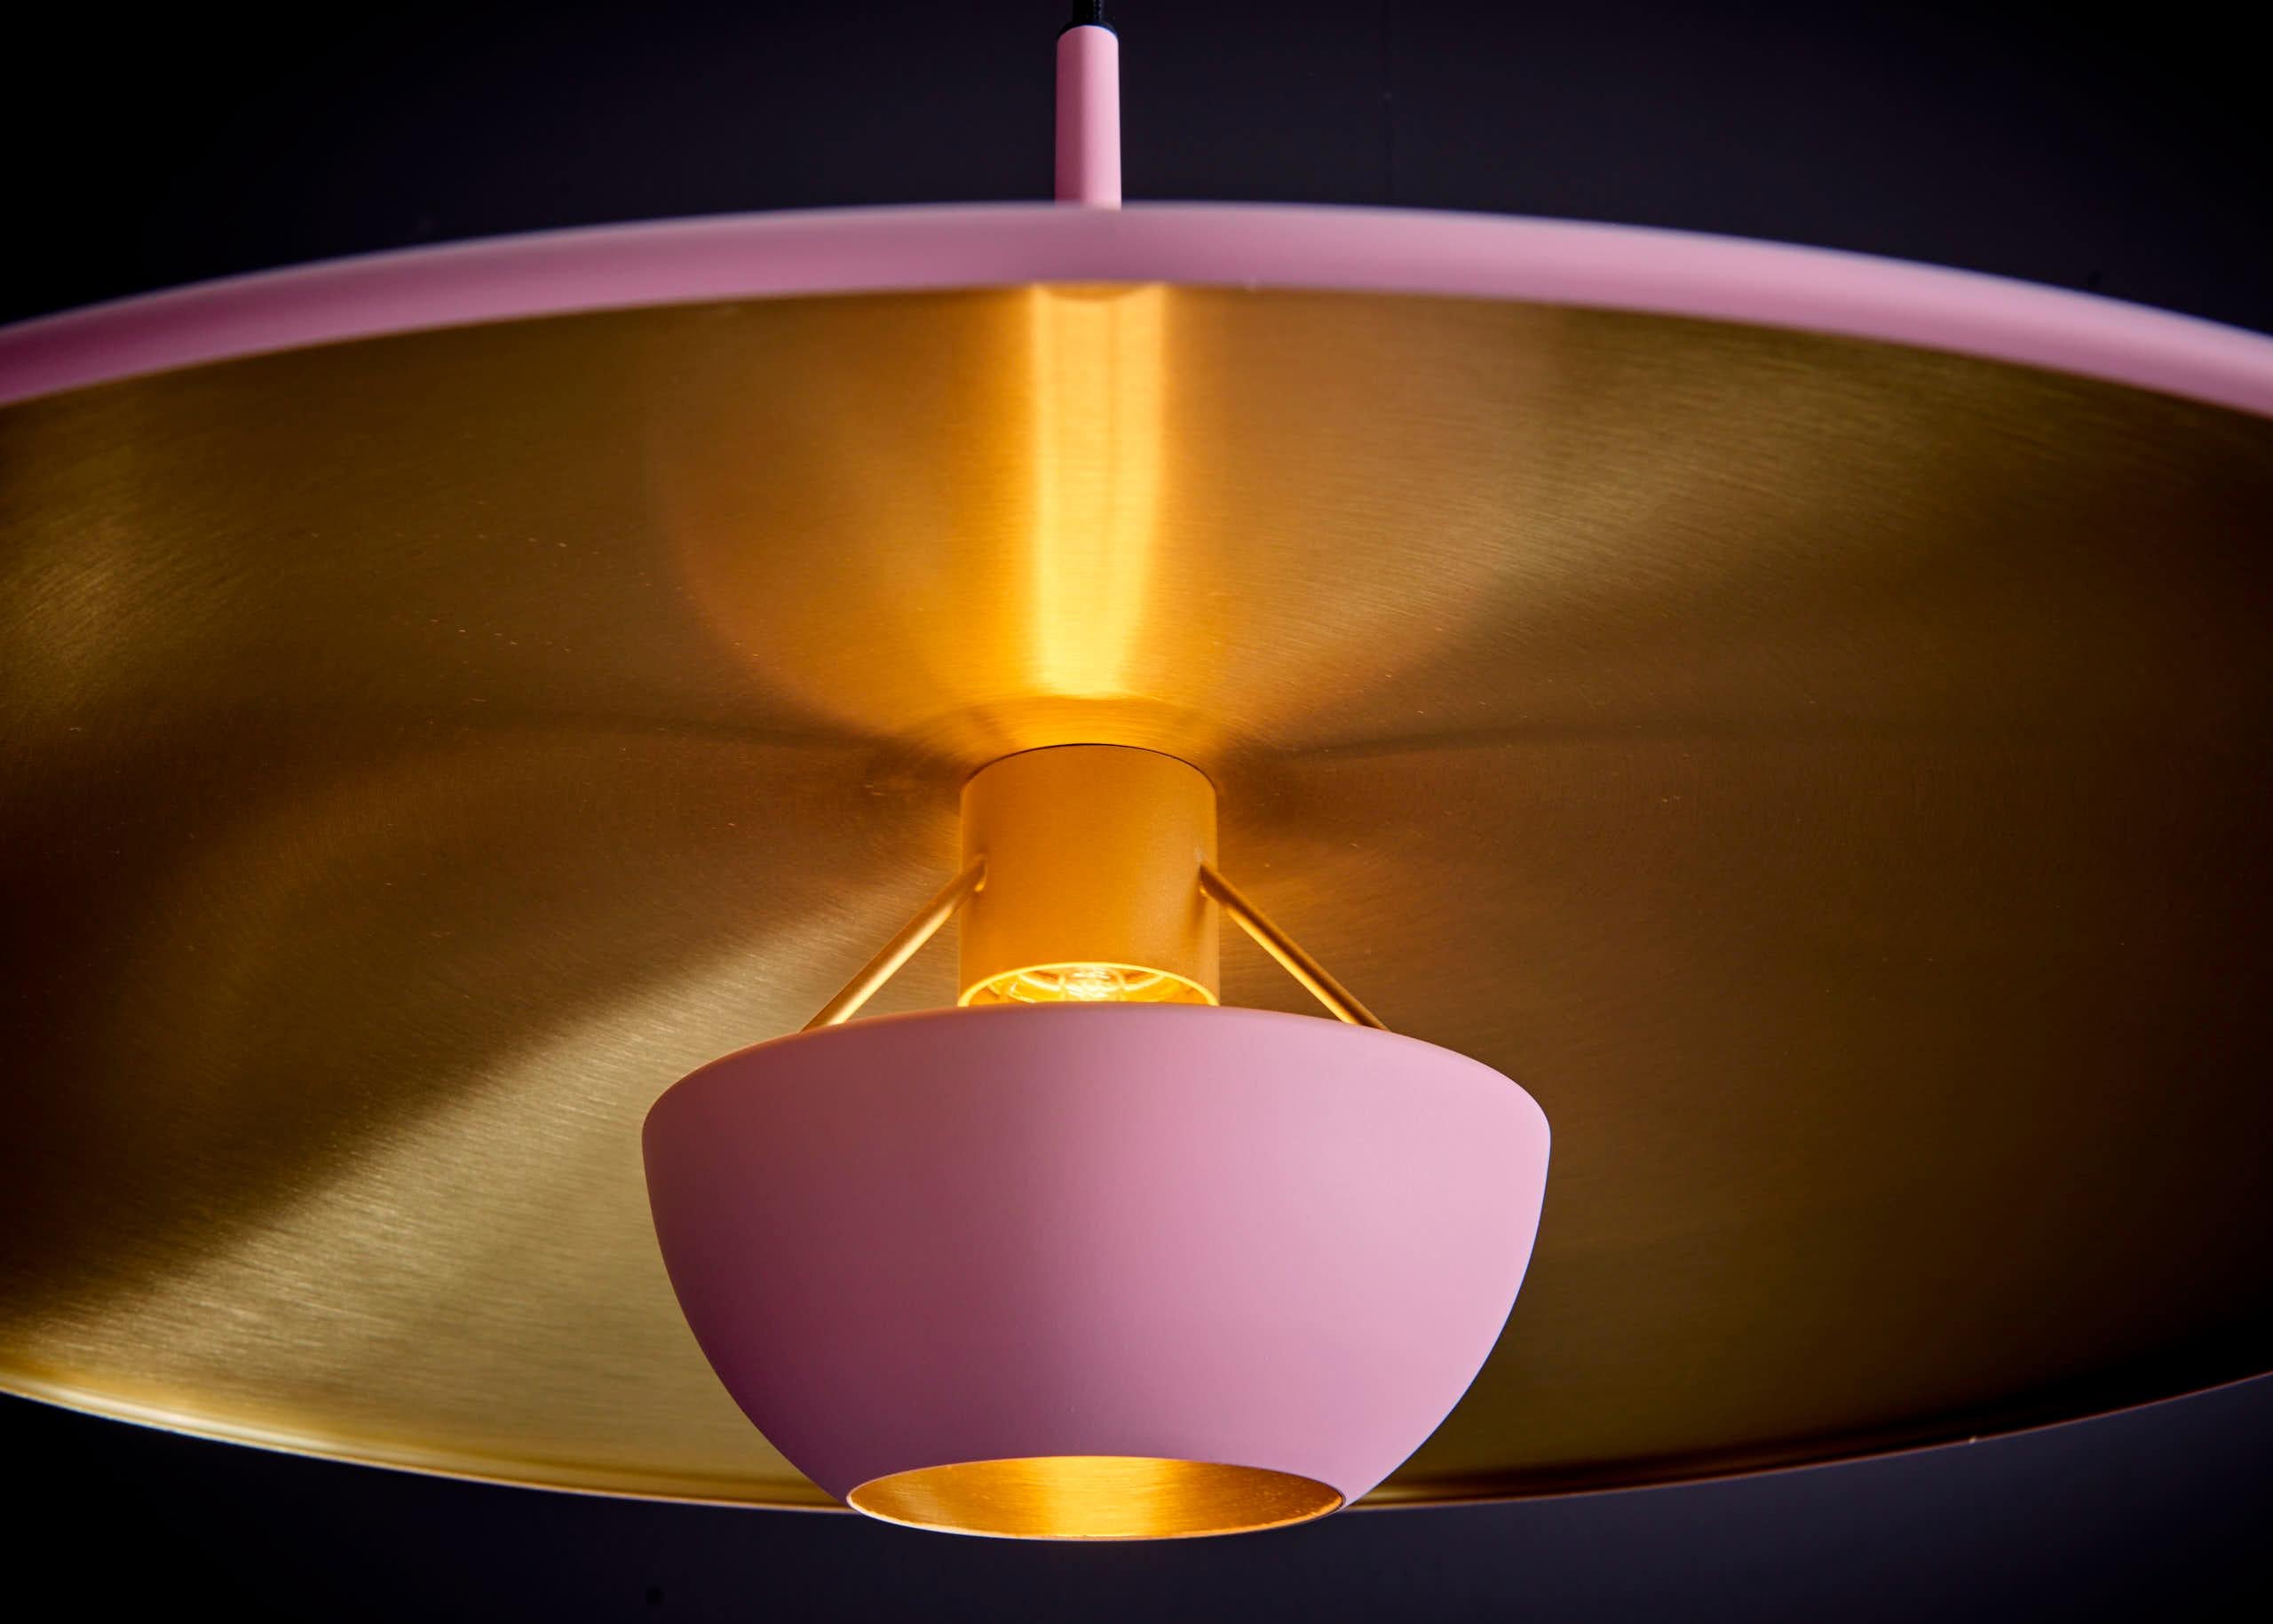 Contemporary Florian Schulz Double Onos 55 in Brass / Flat pink with Side Counterweight 2023 For Sale